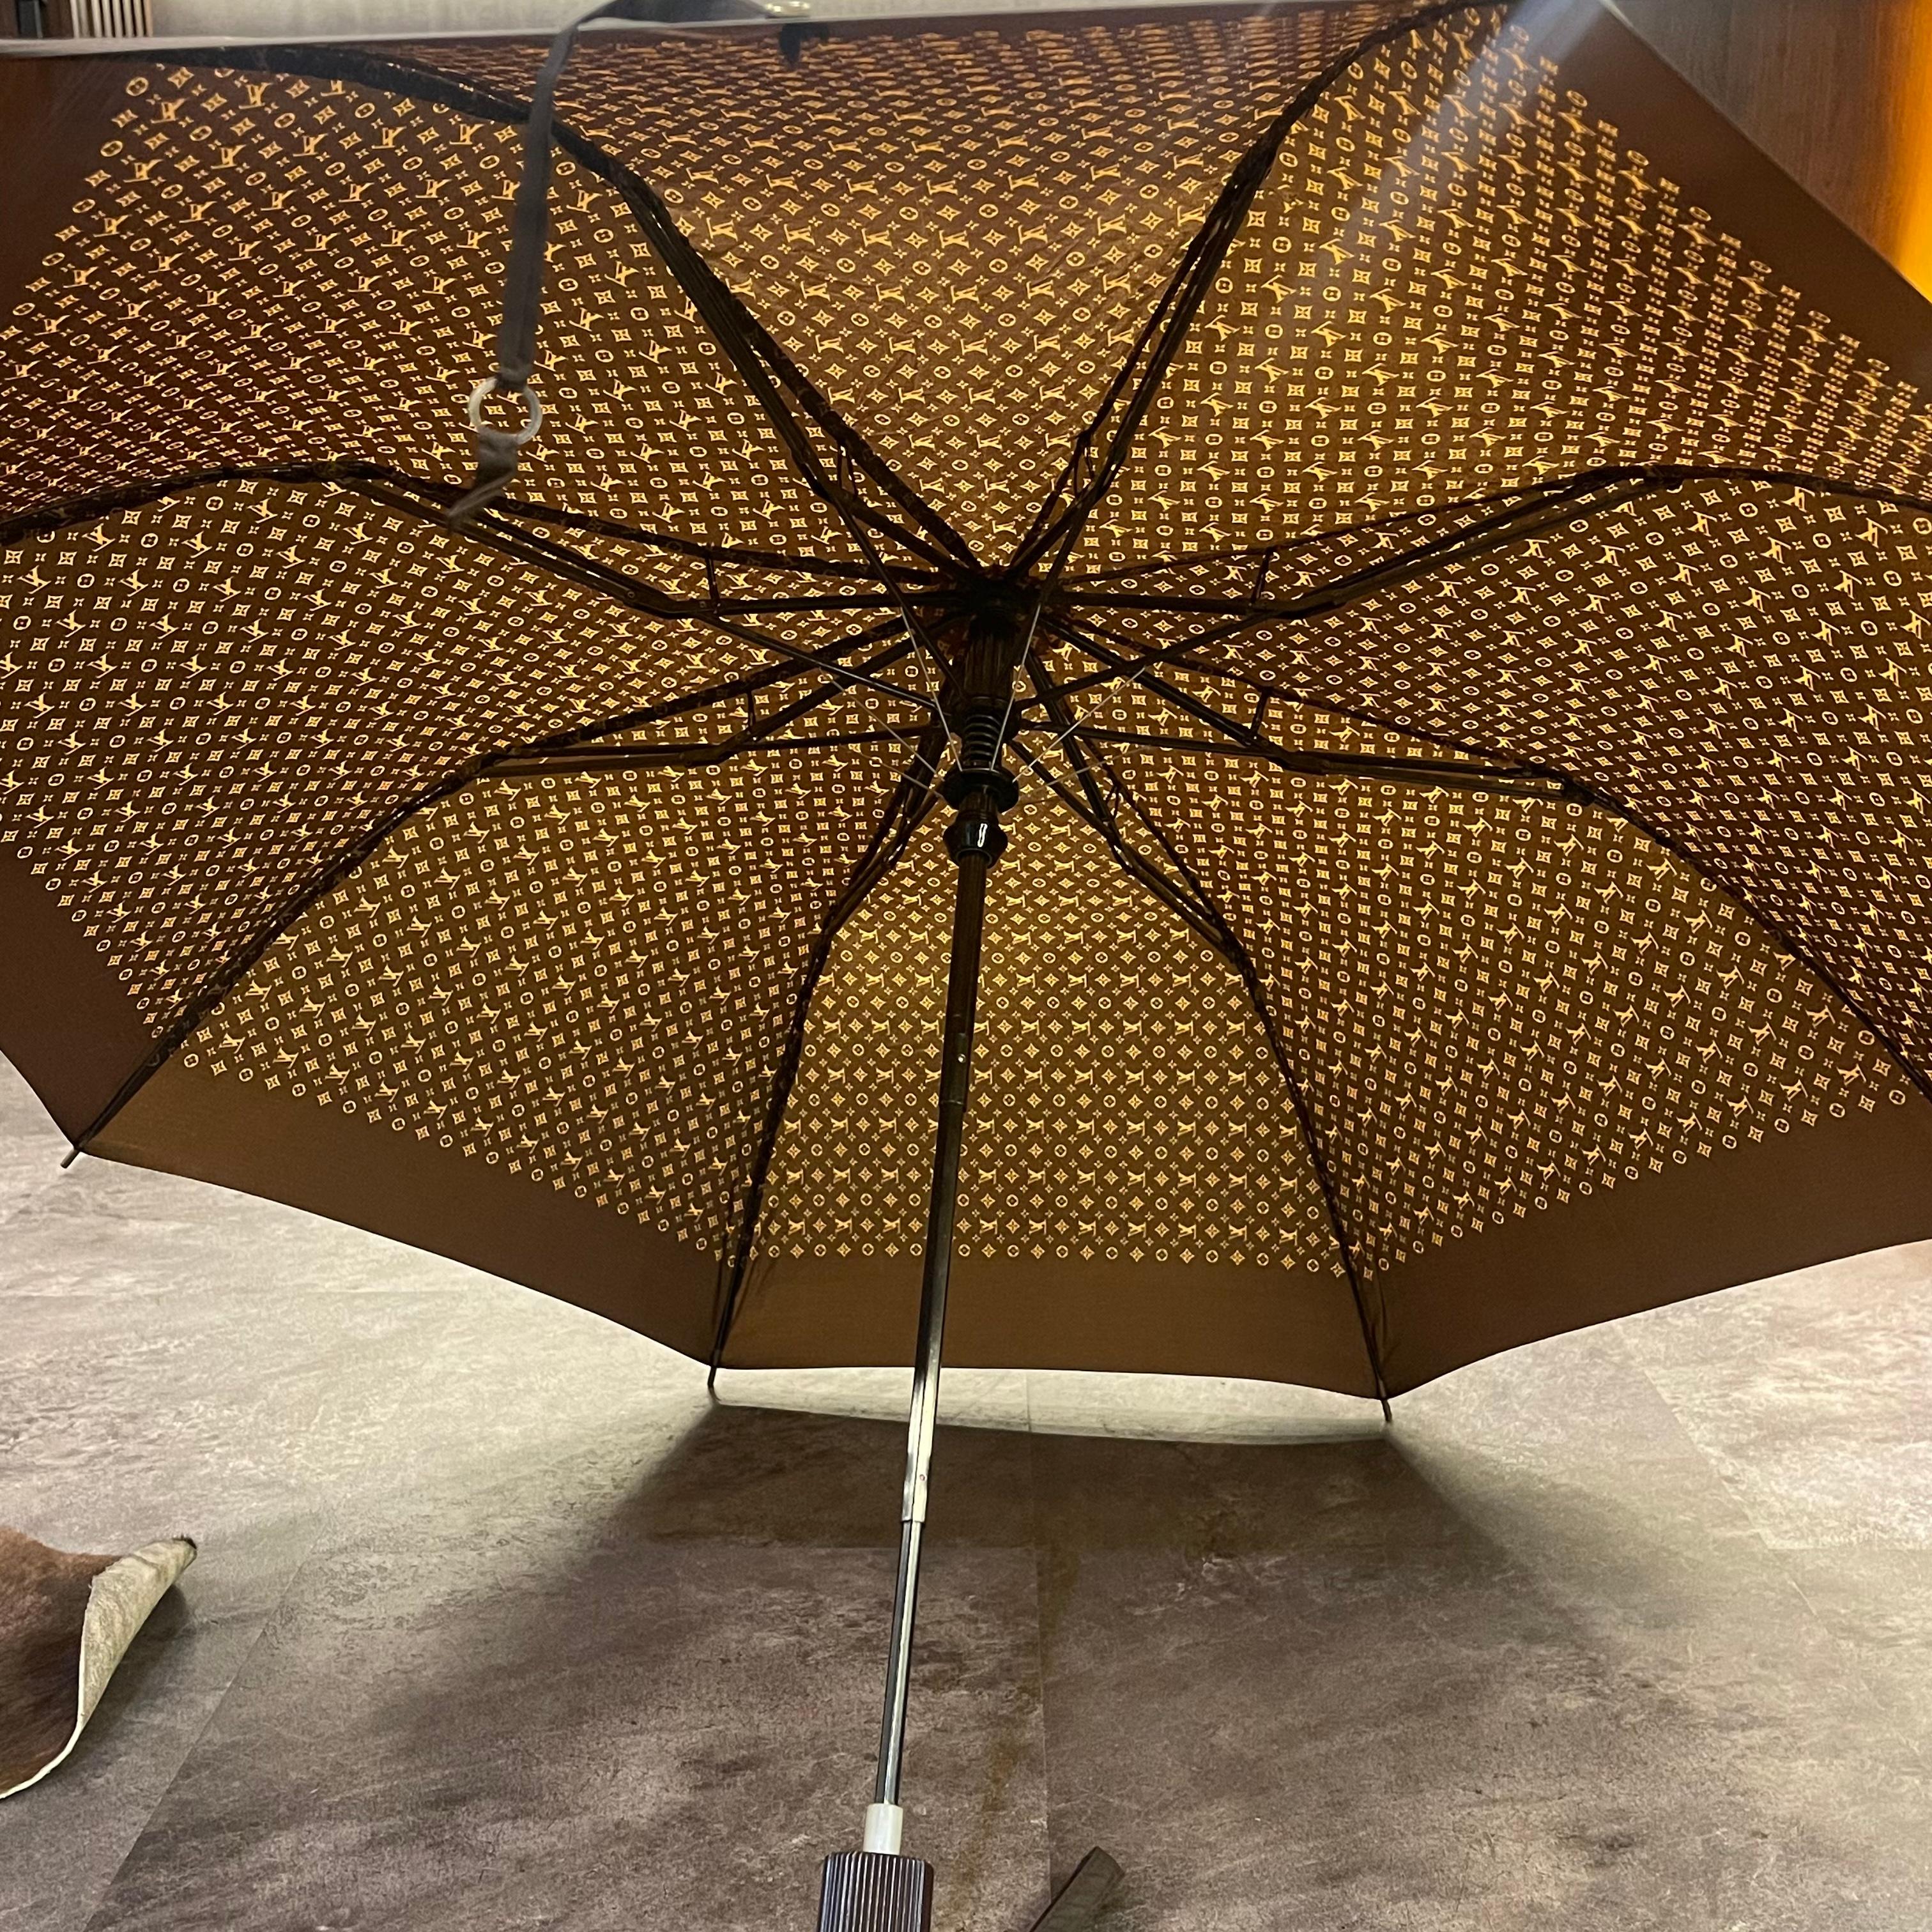 Monogram umbrella with cover. Beautiful collectors piece. Faint oxidation on the hardware. Light scuffing on the plastic handles. 100% polyester.